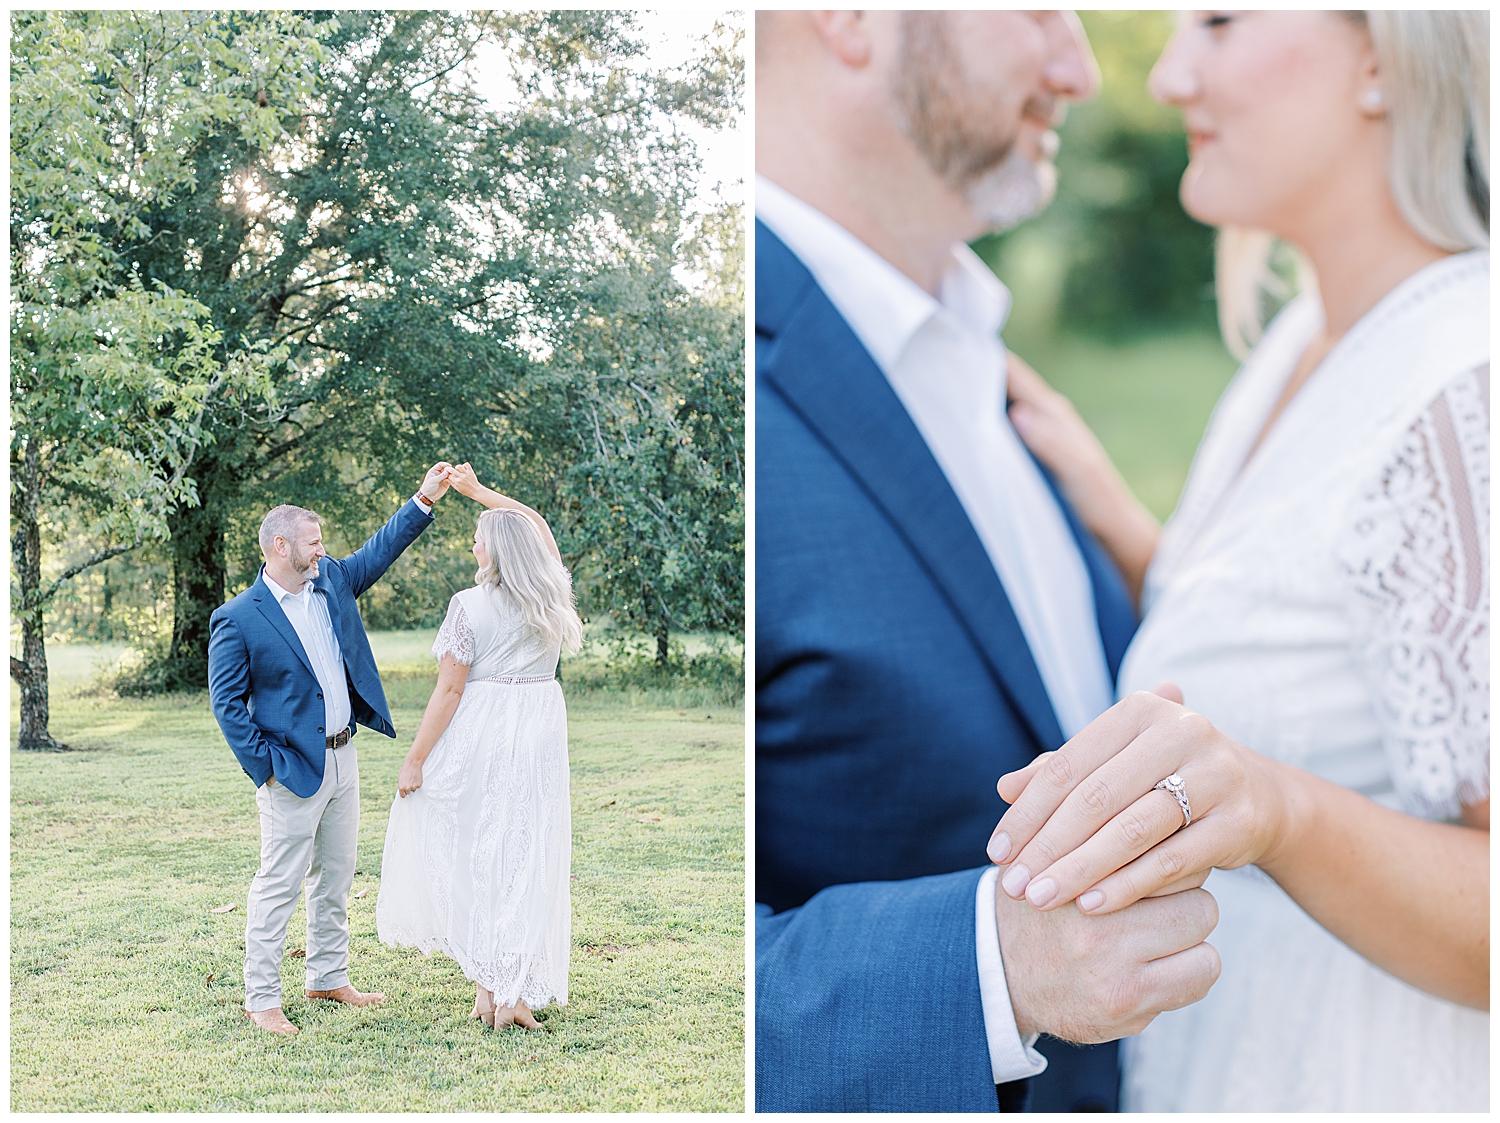 An engaged couple dances in a field while wearing nice clothes.